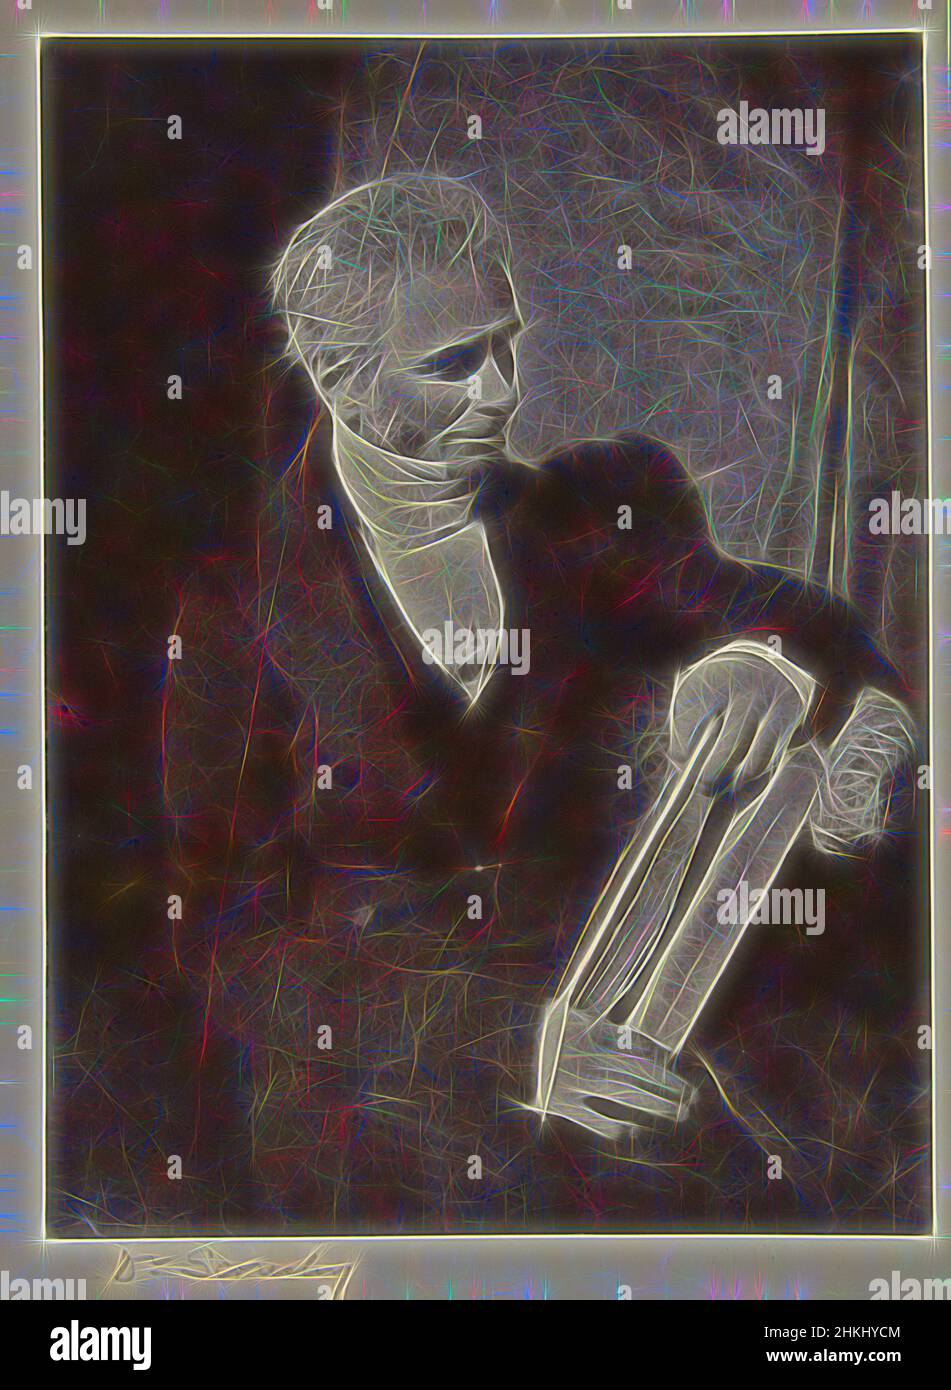 Inspired by Portrait of William Scoresby, Dr. Scoresby, Hill & Adamson, Schotland, c. 1890 - c. 1900, paper, carbon print, height 212 mm × width 156 mmheight 264 mm × width 206 mm, Reimagined by Artotop. Classic art reinvented with a modern twist. Design of warm cheerful glowing of brightness and light ray radiance. Photography inspired by surrealism and futurism, embracing dynamic energy of modern technology, movement, speed and revolutionize culture Stock Photo